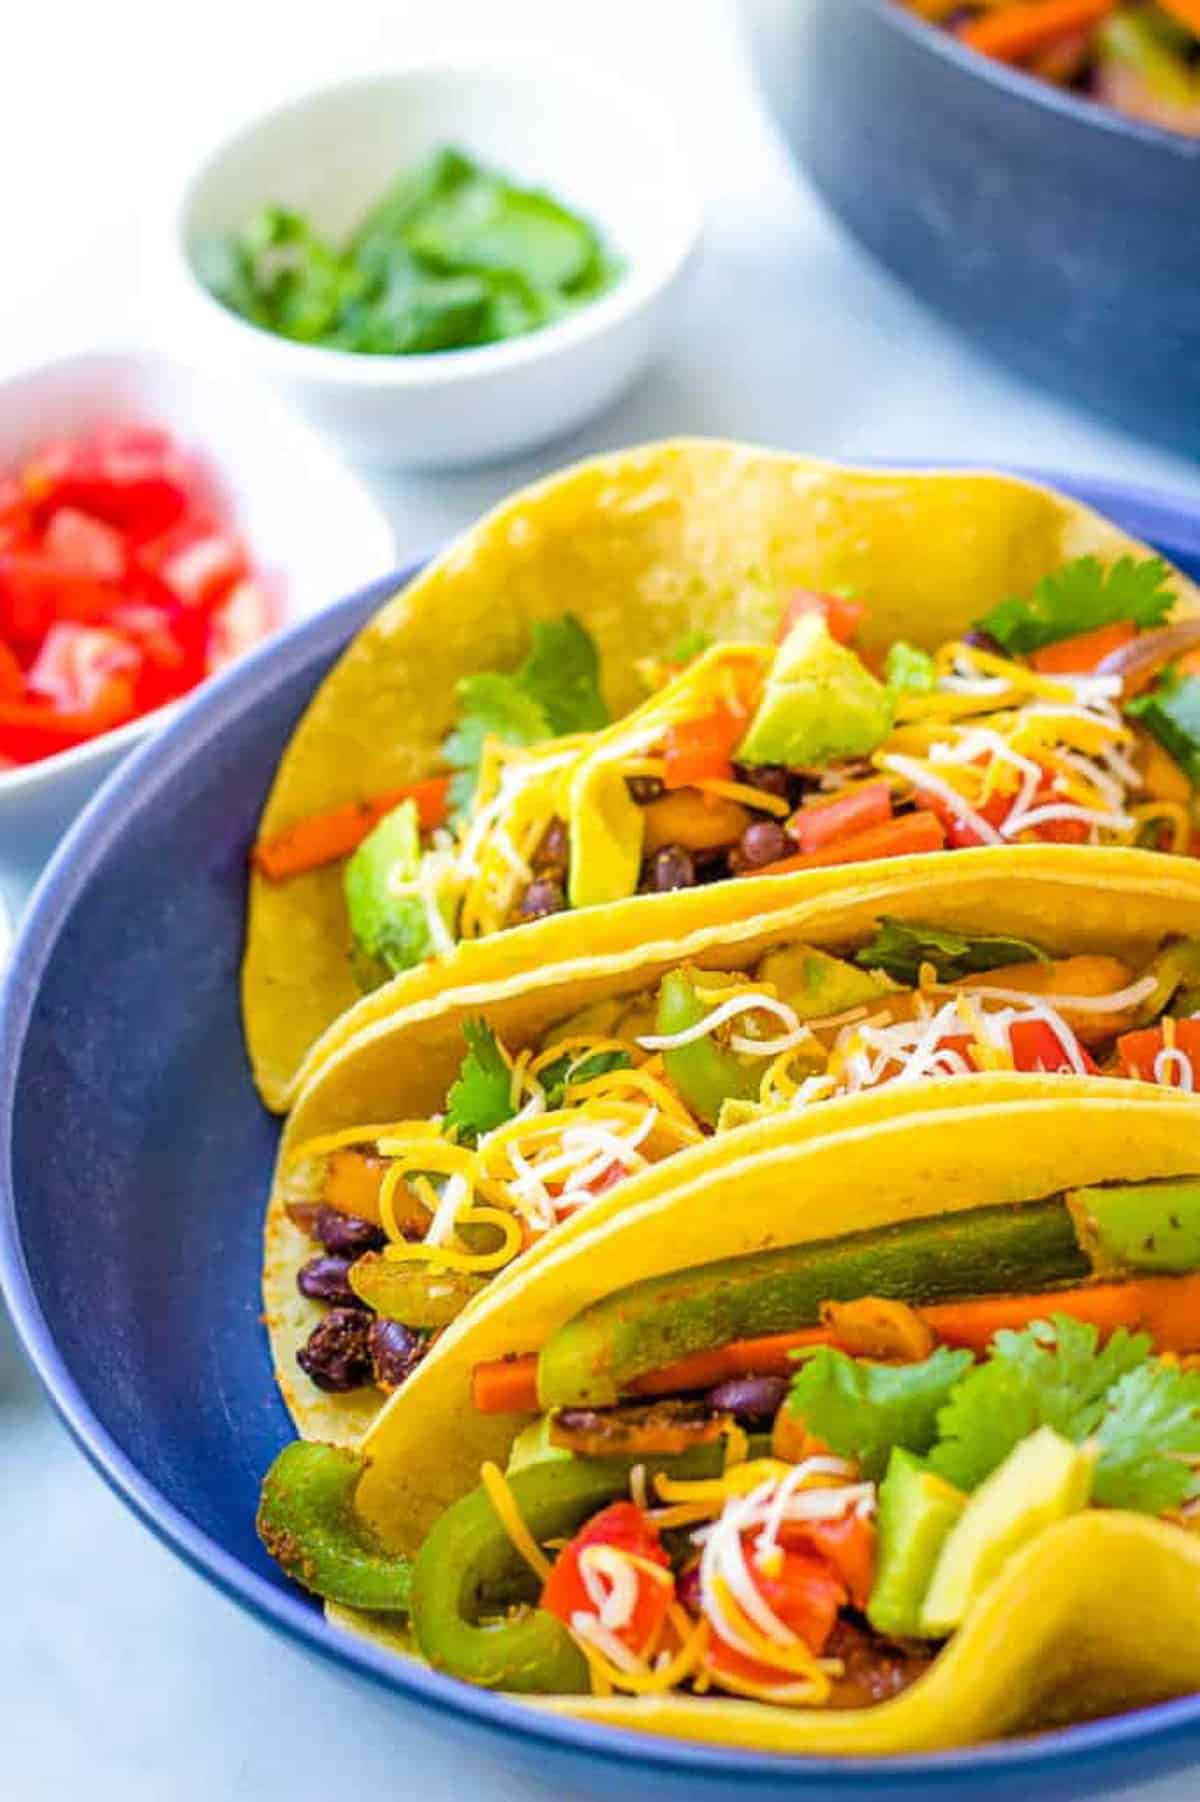 Vegetarian fajitas in a corn tortilla topped with cheese, avocado and cilantro, served in a blue bowl.